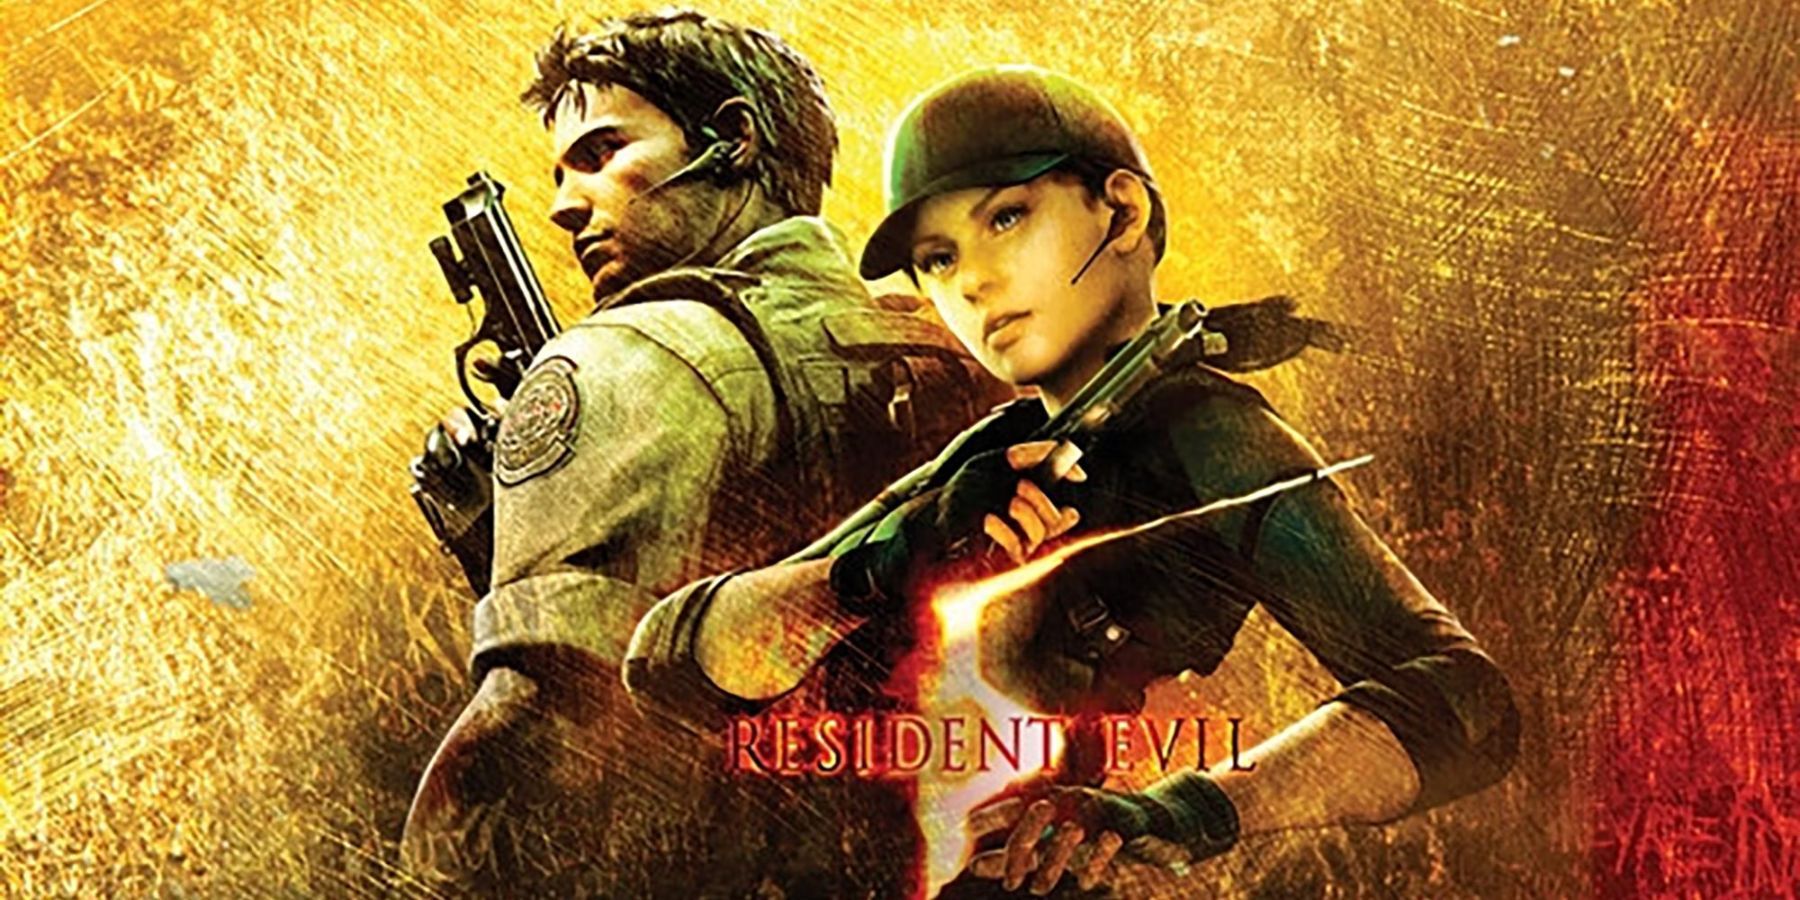 Rino on X: #ResidentEvil has a lot of opportunities for the future, based  on rumors, predictions and fan wishes🚀 ✓Resident Evil 9 ✓Resident Evil 5 ( Remake) ✓Resident Evil: Revelations 3 ✓Resident Evil